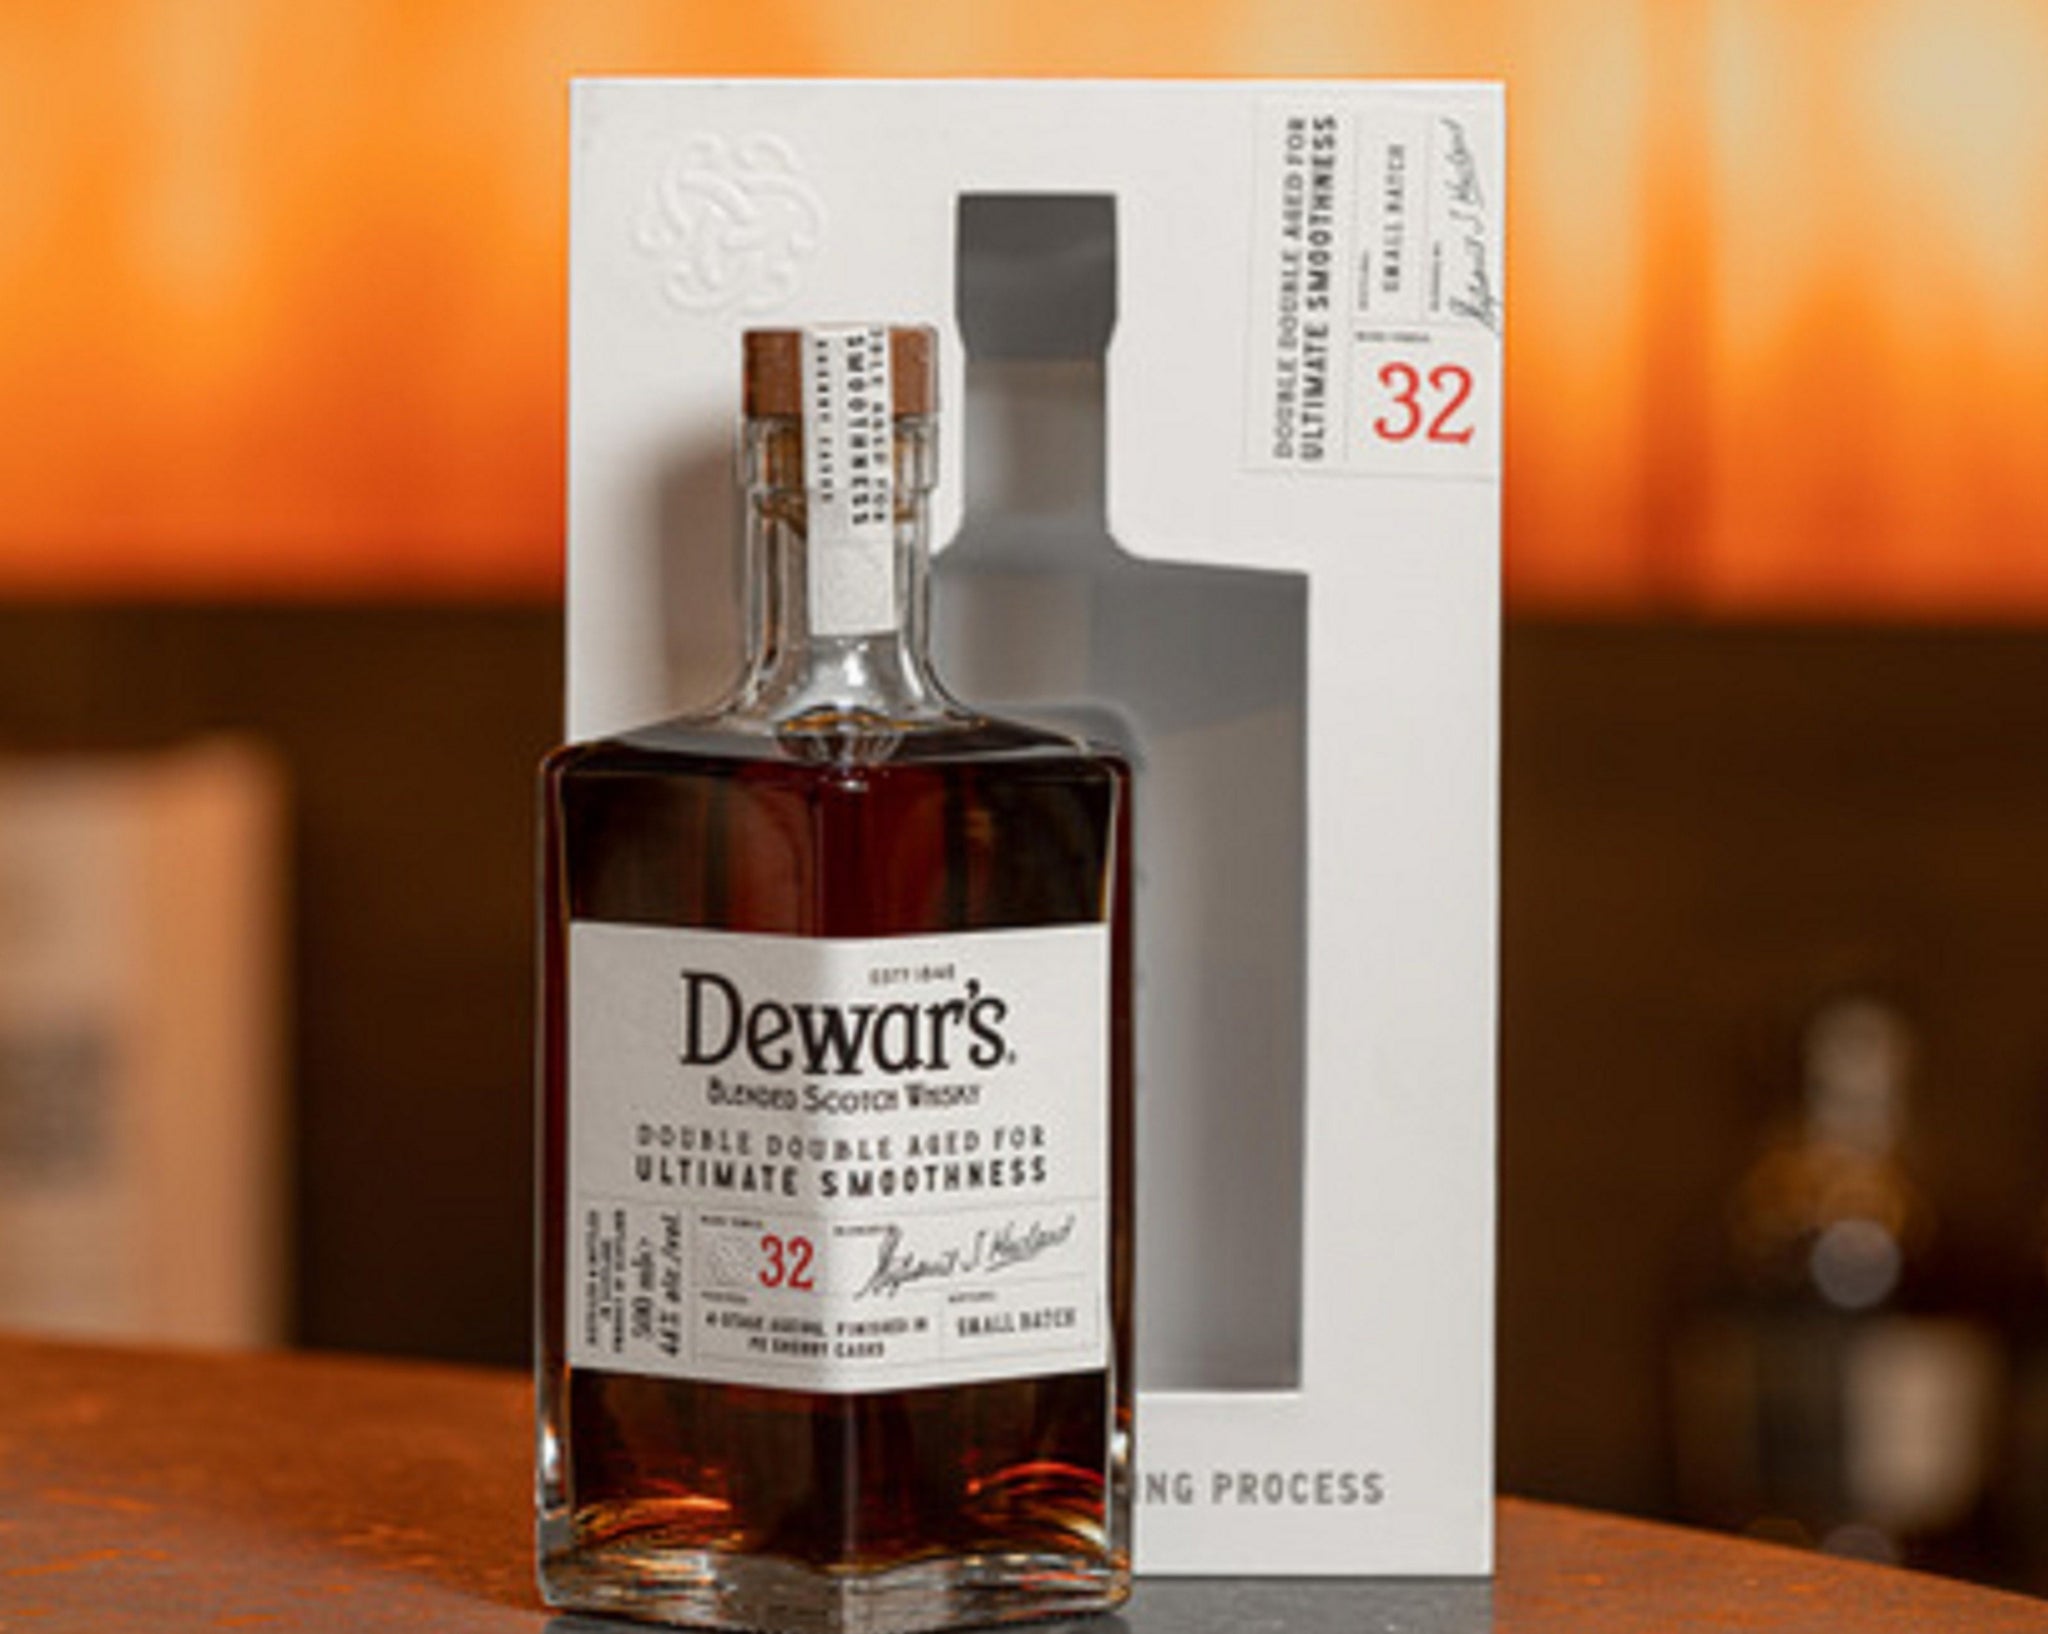 BSW currently has the Dewar's 32 Year Old Double Double in stock